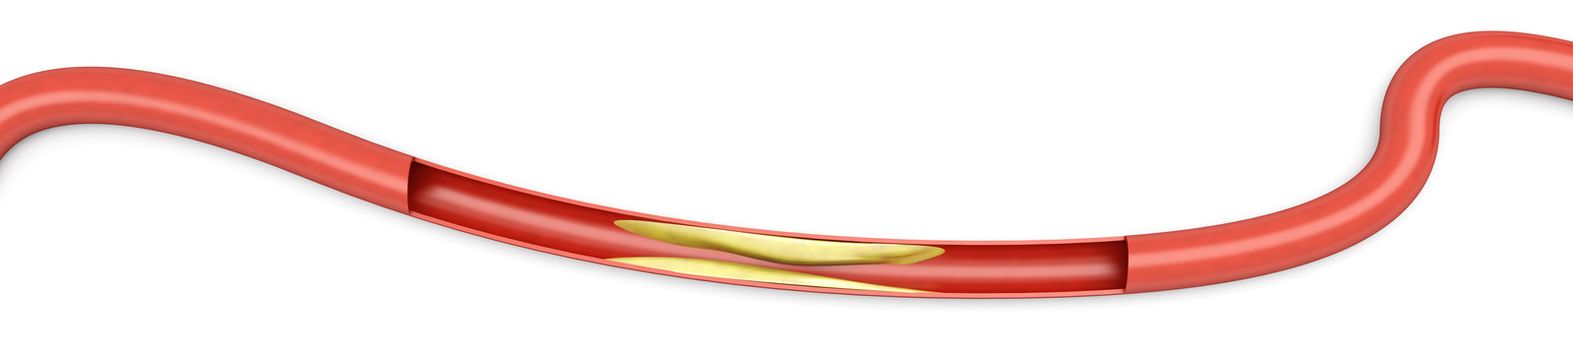 Arteriosclerosis. Plaques tightening an artery. 3D rendered Illsutration. Isolated on white.